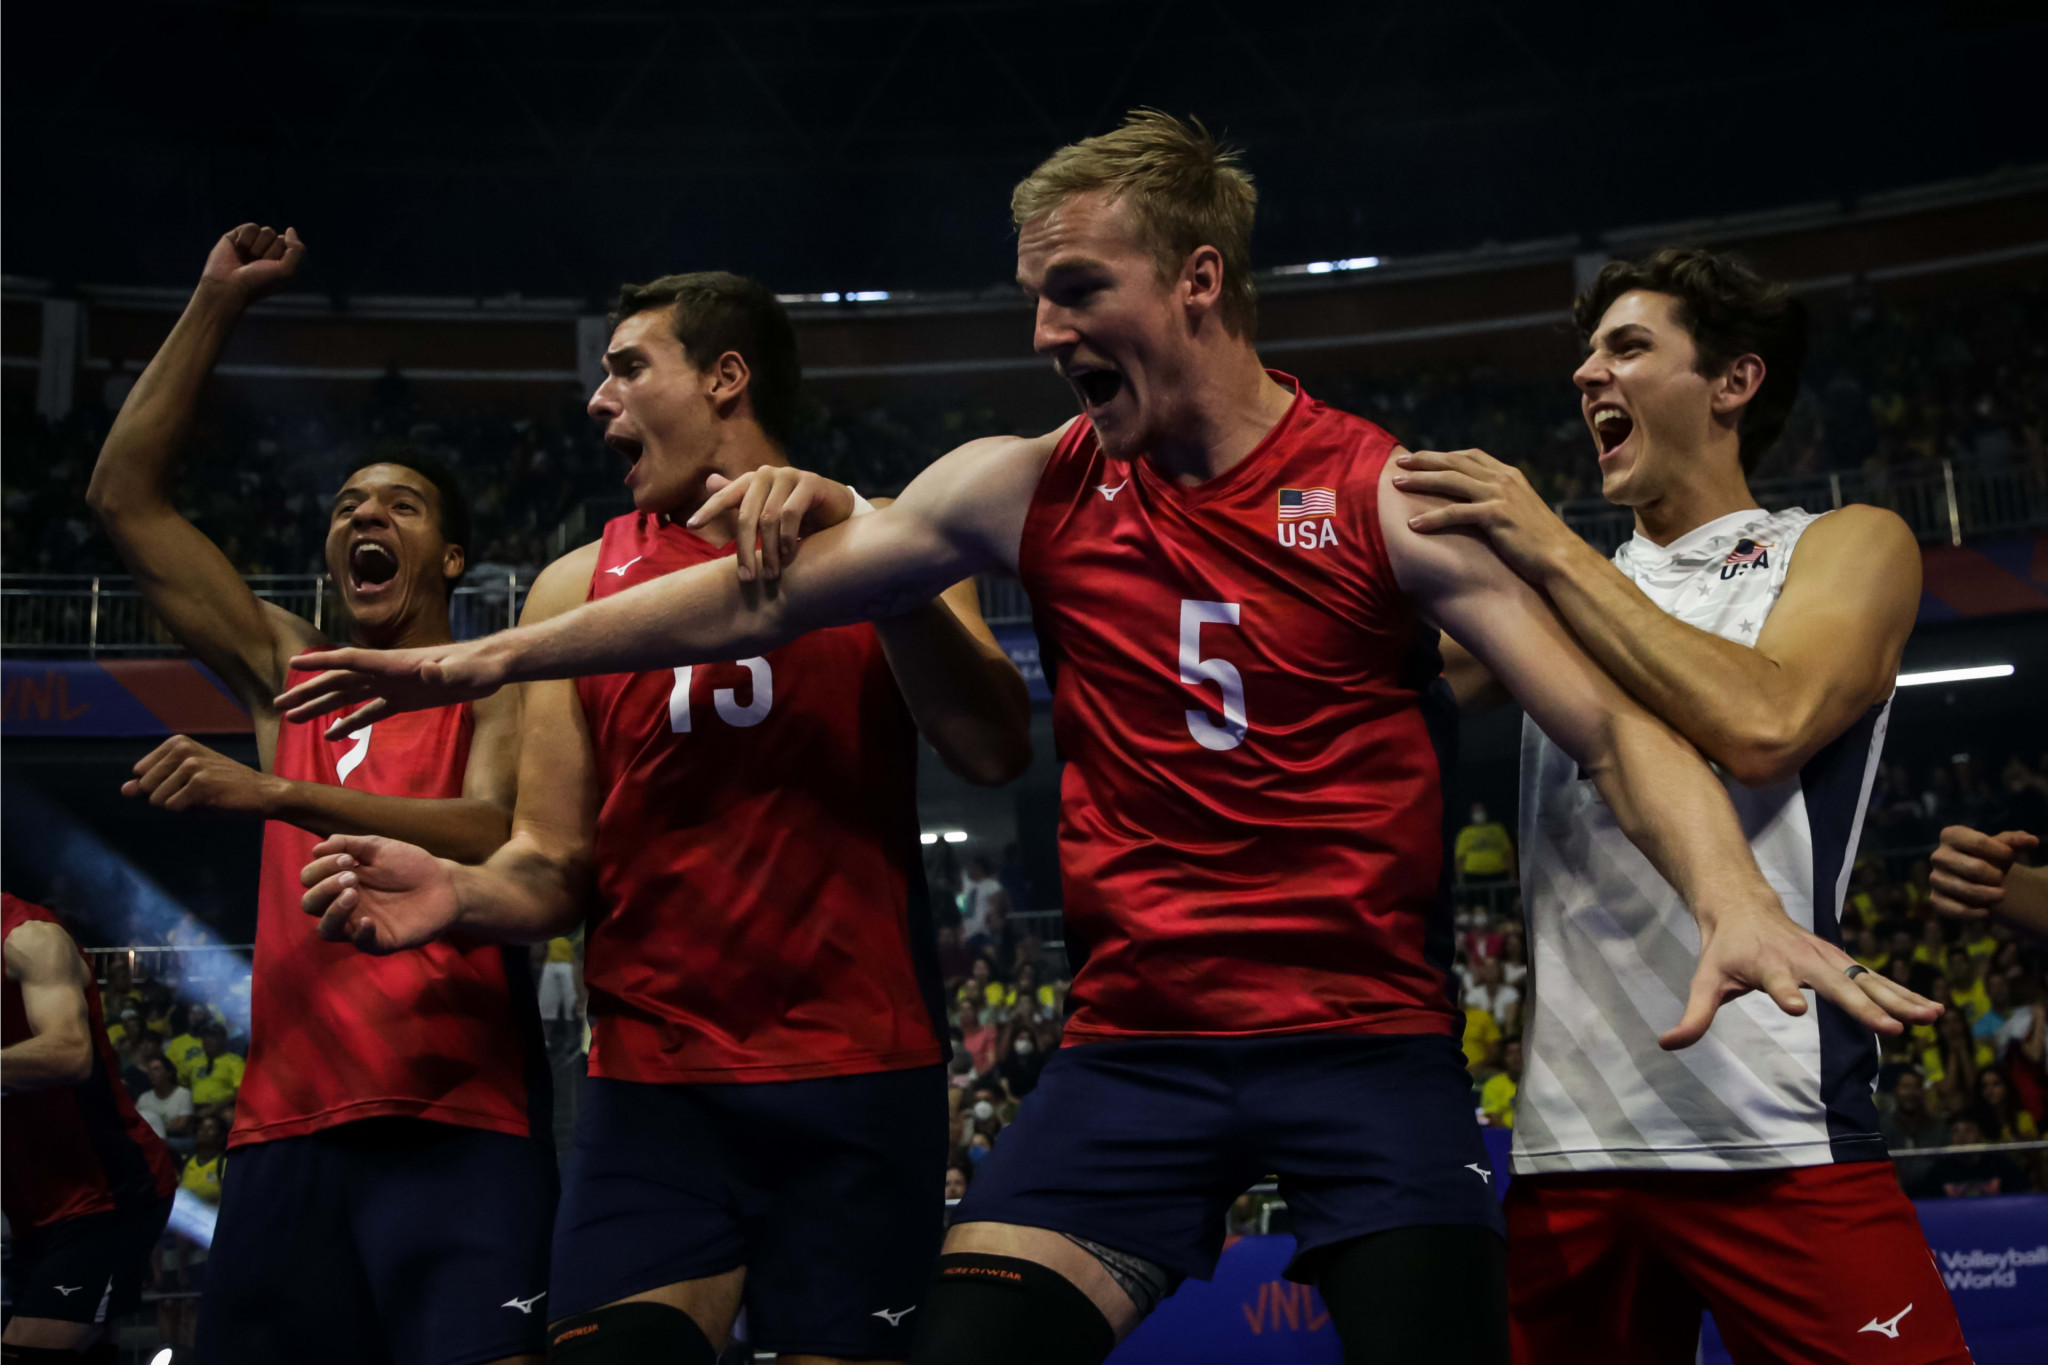 Volleyball World agree partnerships with clothes brand and betting